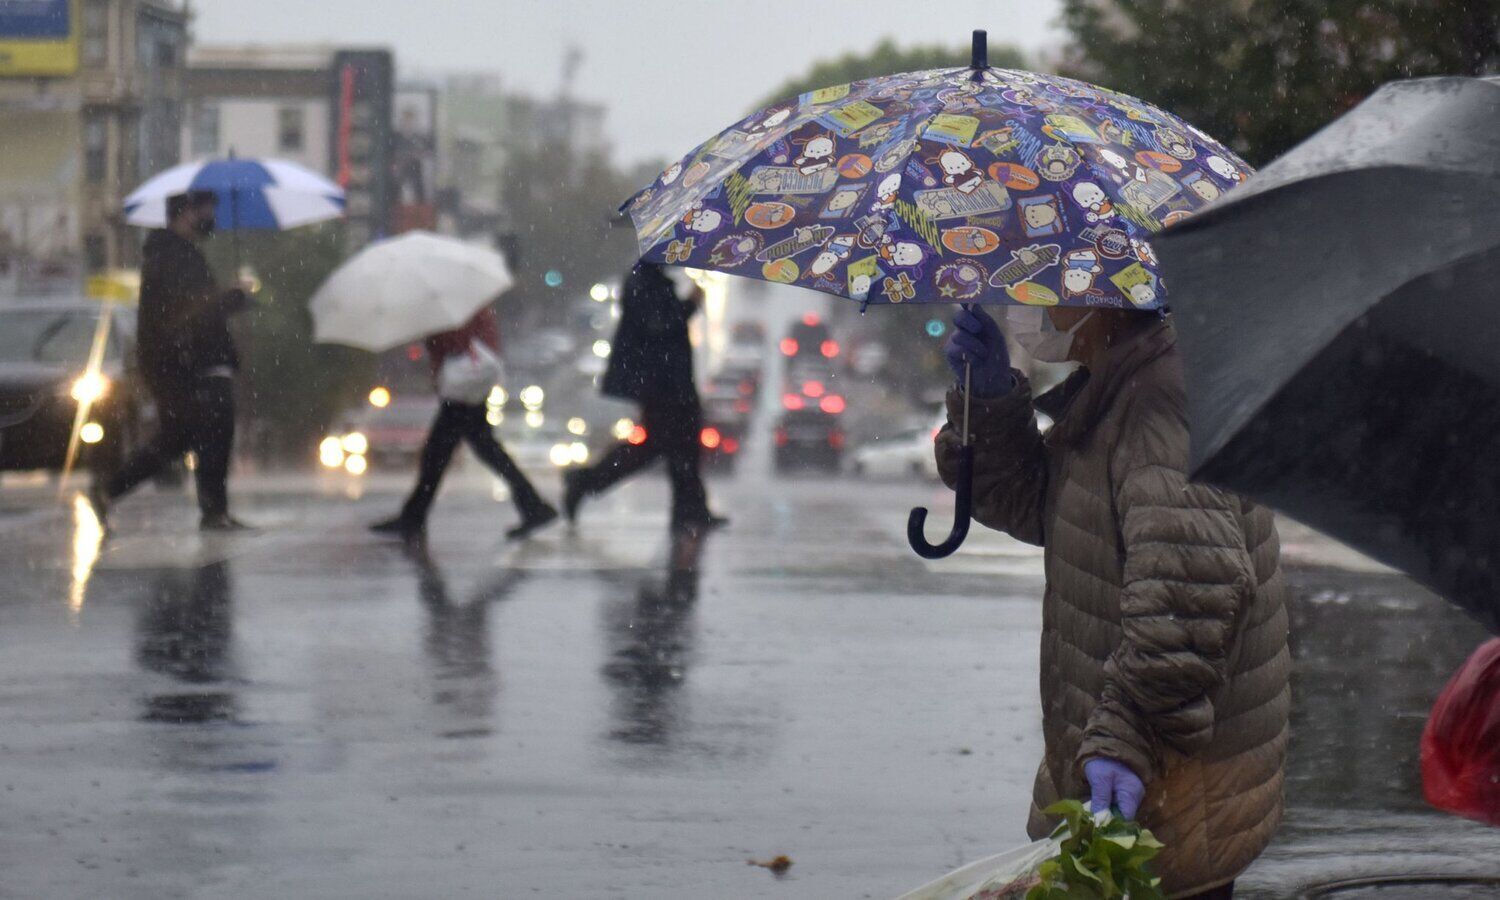 Weather Today Update: It will rain in the states of South India, the weather becomes cold in the plains